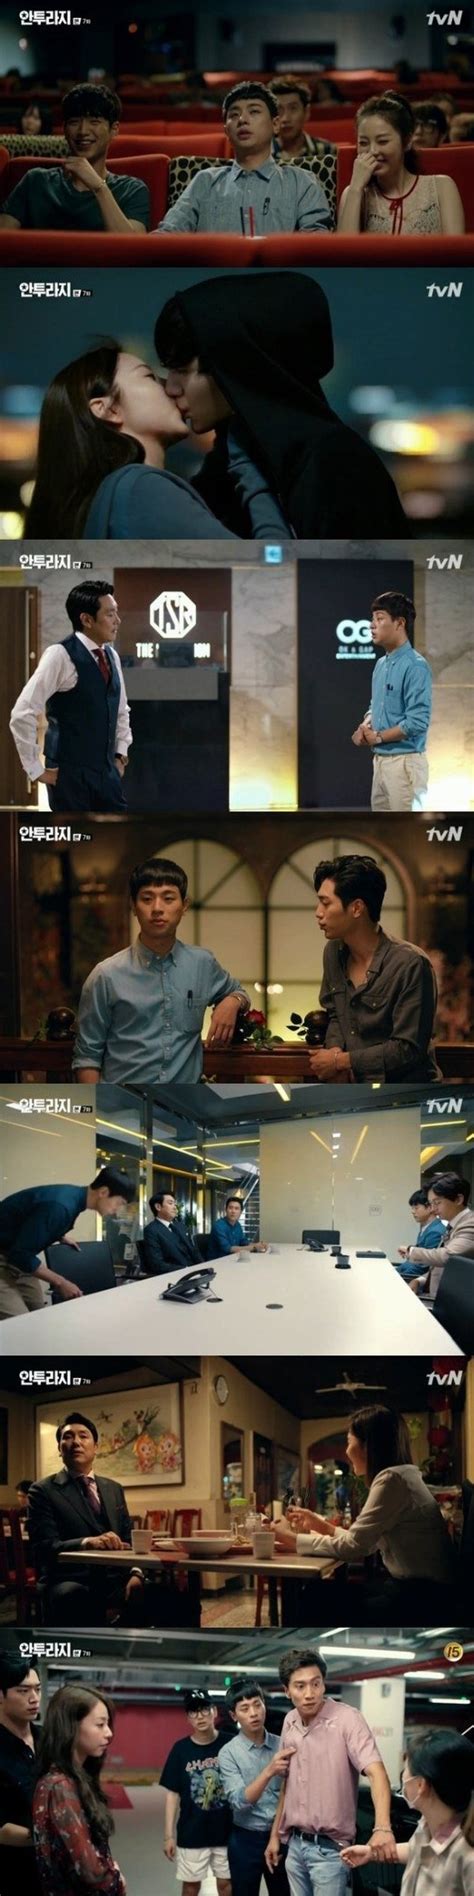 Spoiler Added Episodes 7 And 8 Captures For The Korean Drama